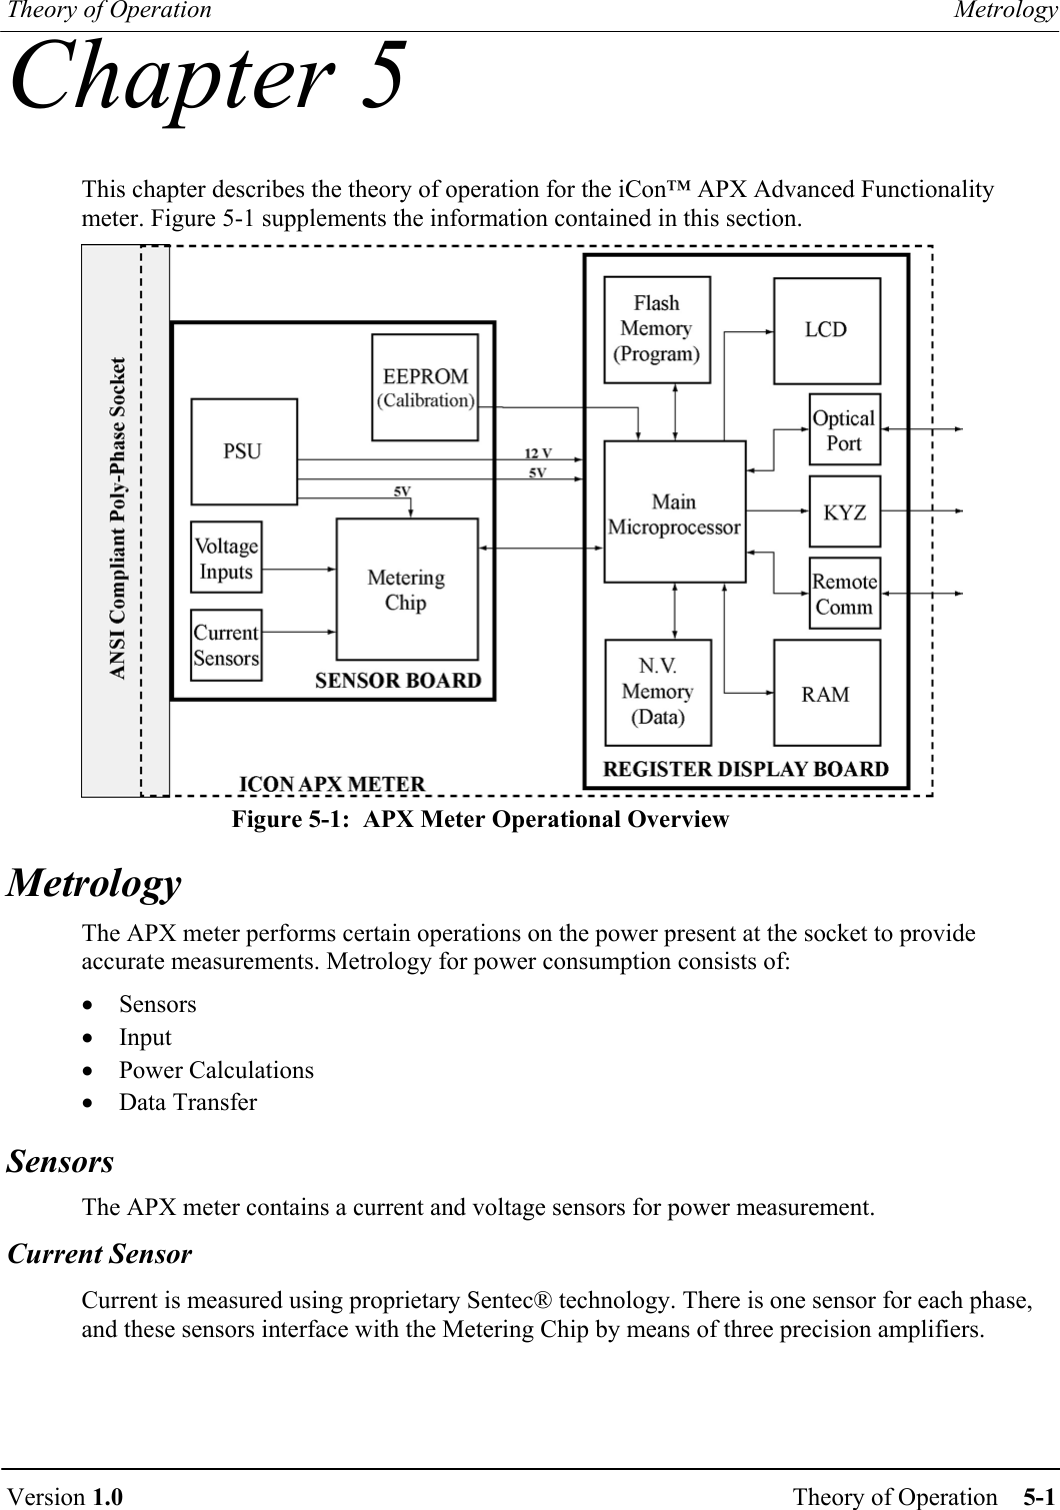 Theory of Operation  Metrology  Version 1.0  Theory of Operation    5-1    Chapter 5 This chapter describes the theory of operation for the iCon™ APX Advanced Functionality meter. Figure 5-1 supplements the information contained in this section.   Figure 5-1:  APX Meter Operational Overview Metrology The APX meter performs certain operations on the power present at the socket to provide accurate measurements. Metrology for power consumption consists of: •  Sensors •  Input •  Power Calculations •  Data Transfer Sensors The APX meter contains a current and voltage sensors for power measurement. Current Sensor Current is measured using proprietary Sentec® technology. There is one sensor for each phase, and these sensors interface with the Metering Chip by means of three precision amplifiers. 